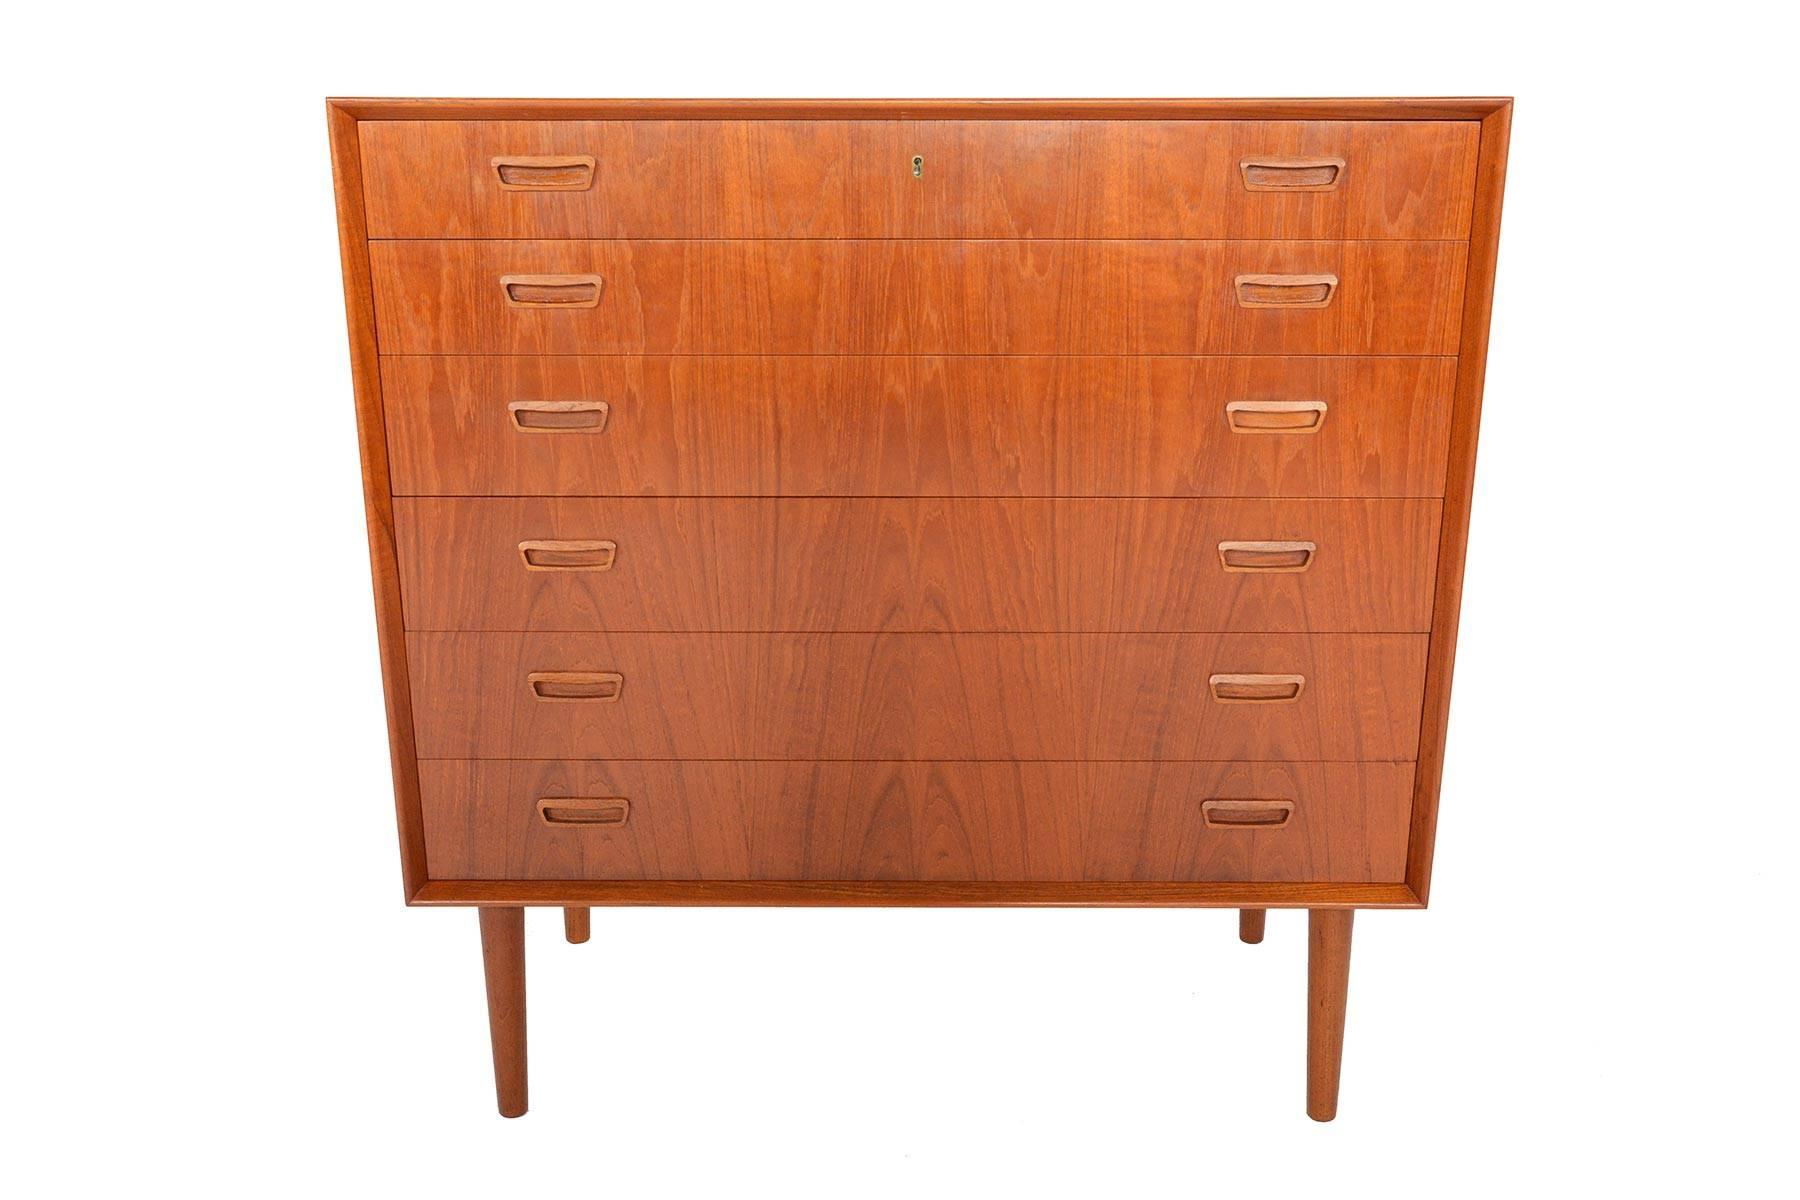 This gorgeous Danish modern midcentury highboy dresser features six extra wide drawers accented by hand carved rectangular drawer pulls. Designed by Borge Seindal, this stunning piece was manufactured on is finished in brilliant old growth teak.